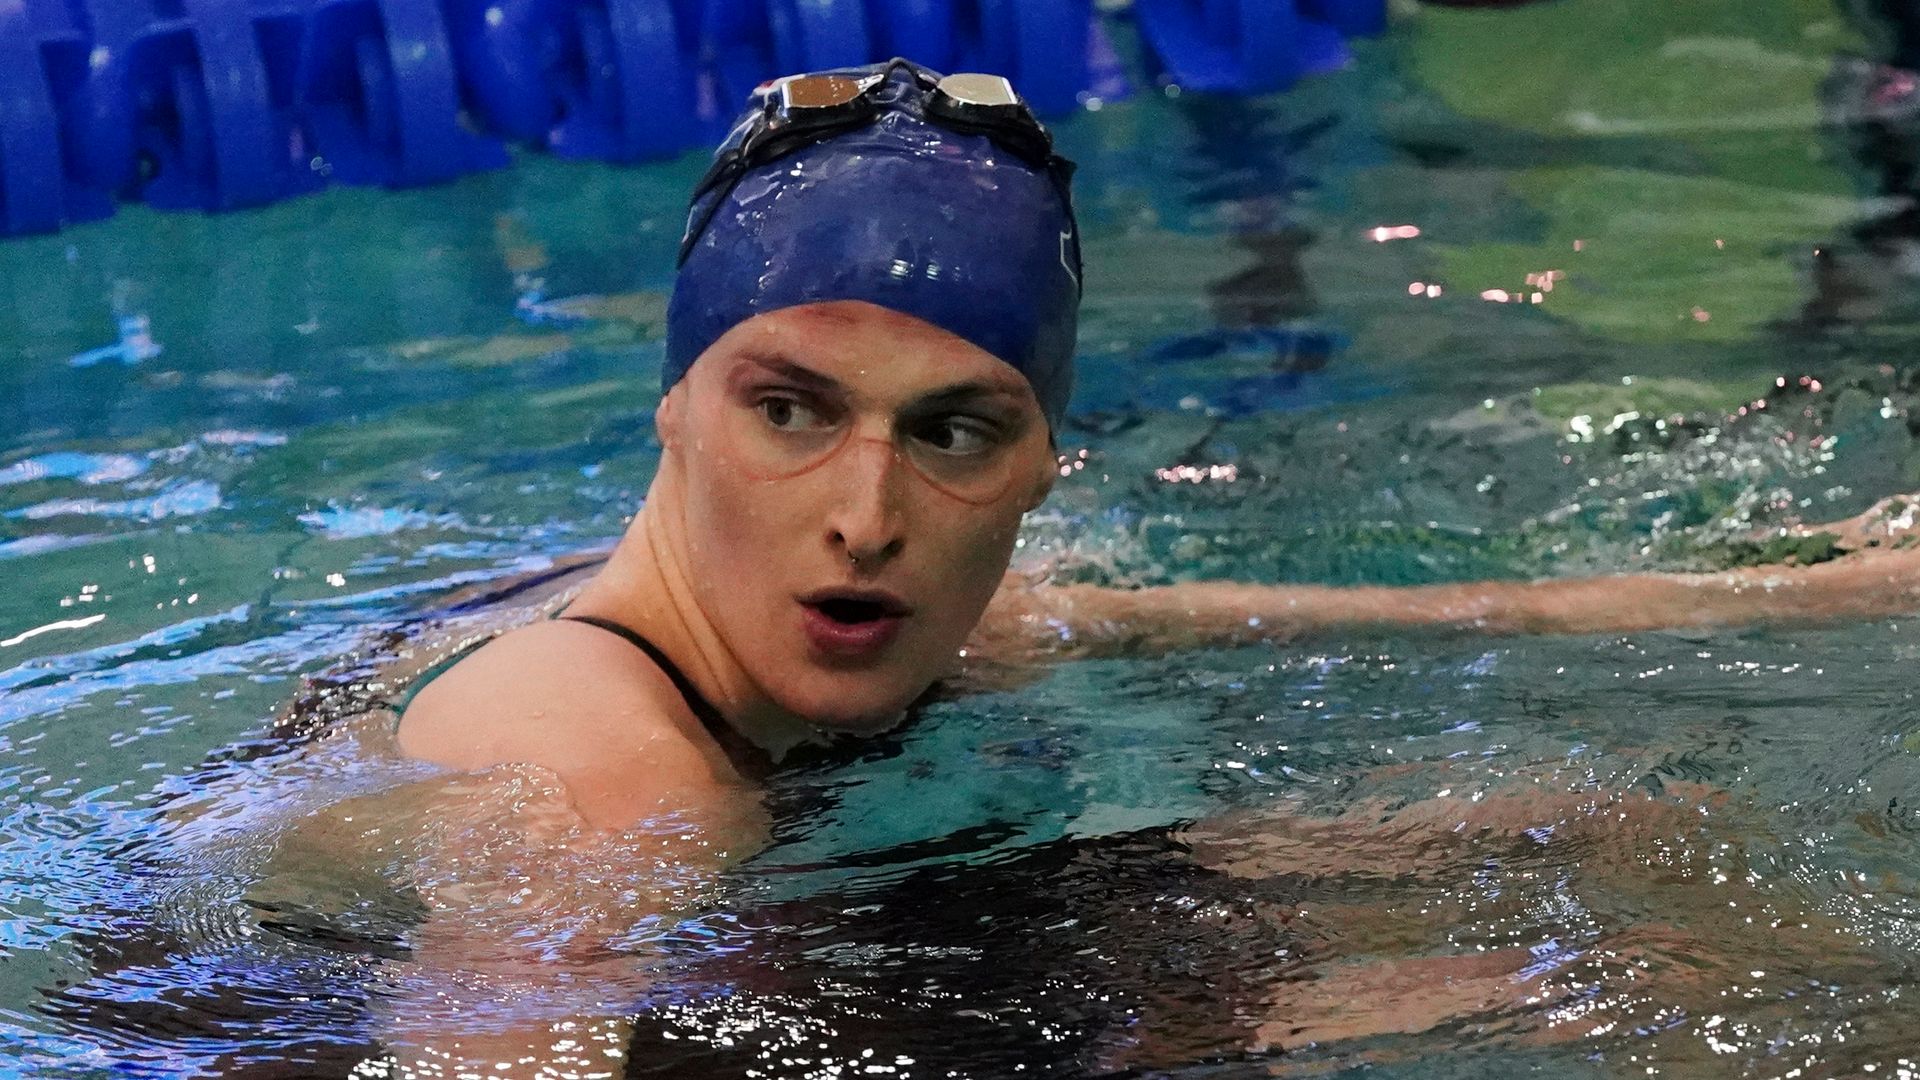 Lia Thomas, a transgender swimmer, has lost her case against World Aquatics' transgender policy, barring her from competition.